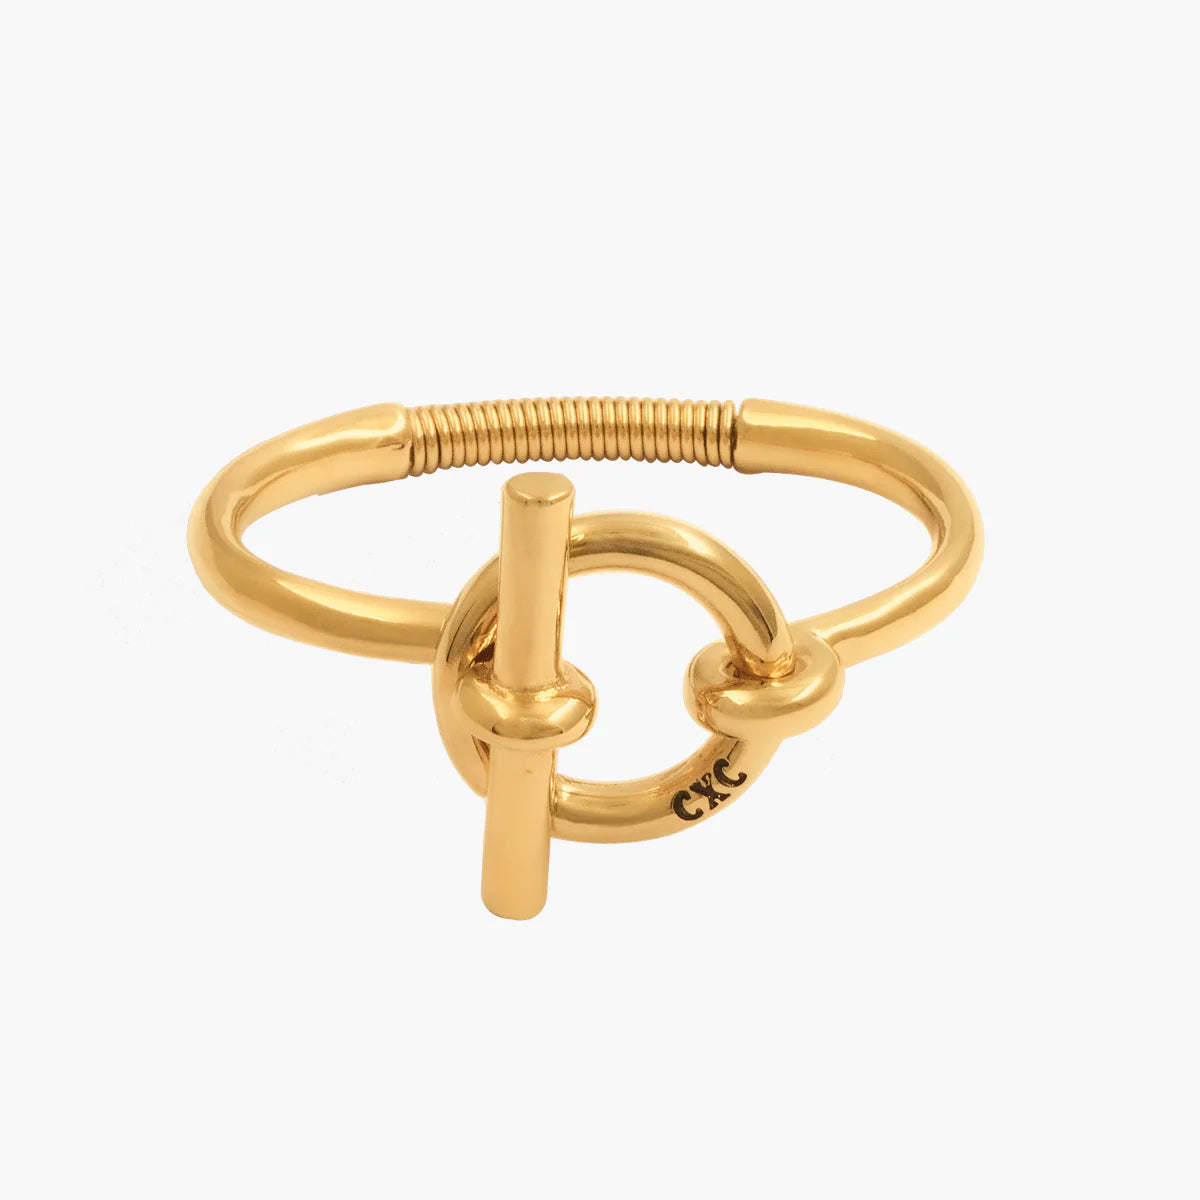 Forever bracelet” trend arrives in Charlotte via local jewelry store Quad  Espresso - Axios Charlotte